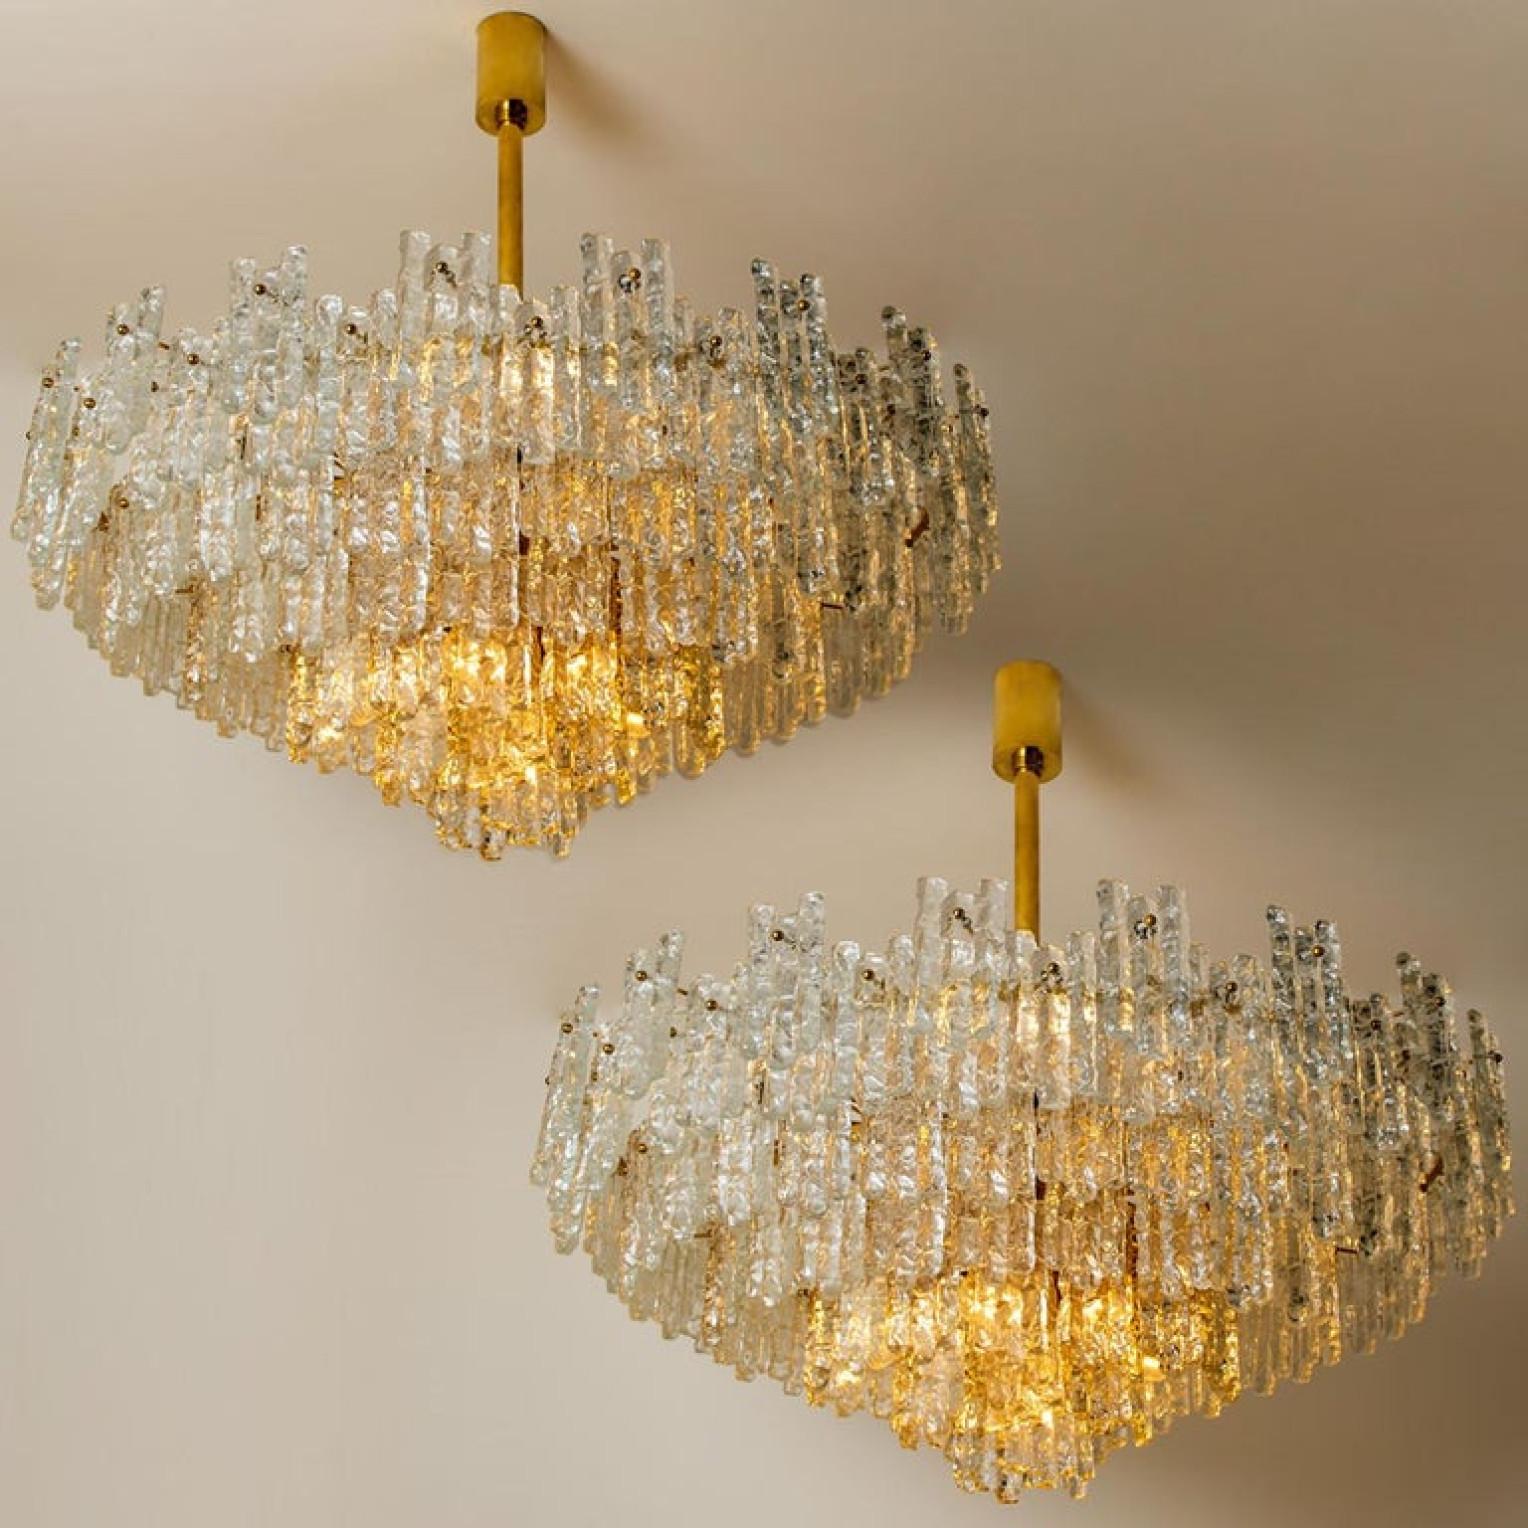 1 of the 2 Exceptional Huge Glass Flush Mount /Chandeliers by J.T. Kalmar, 1960s For Sale 5